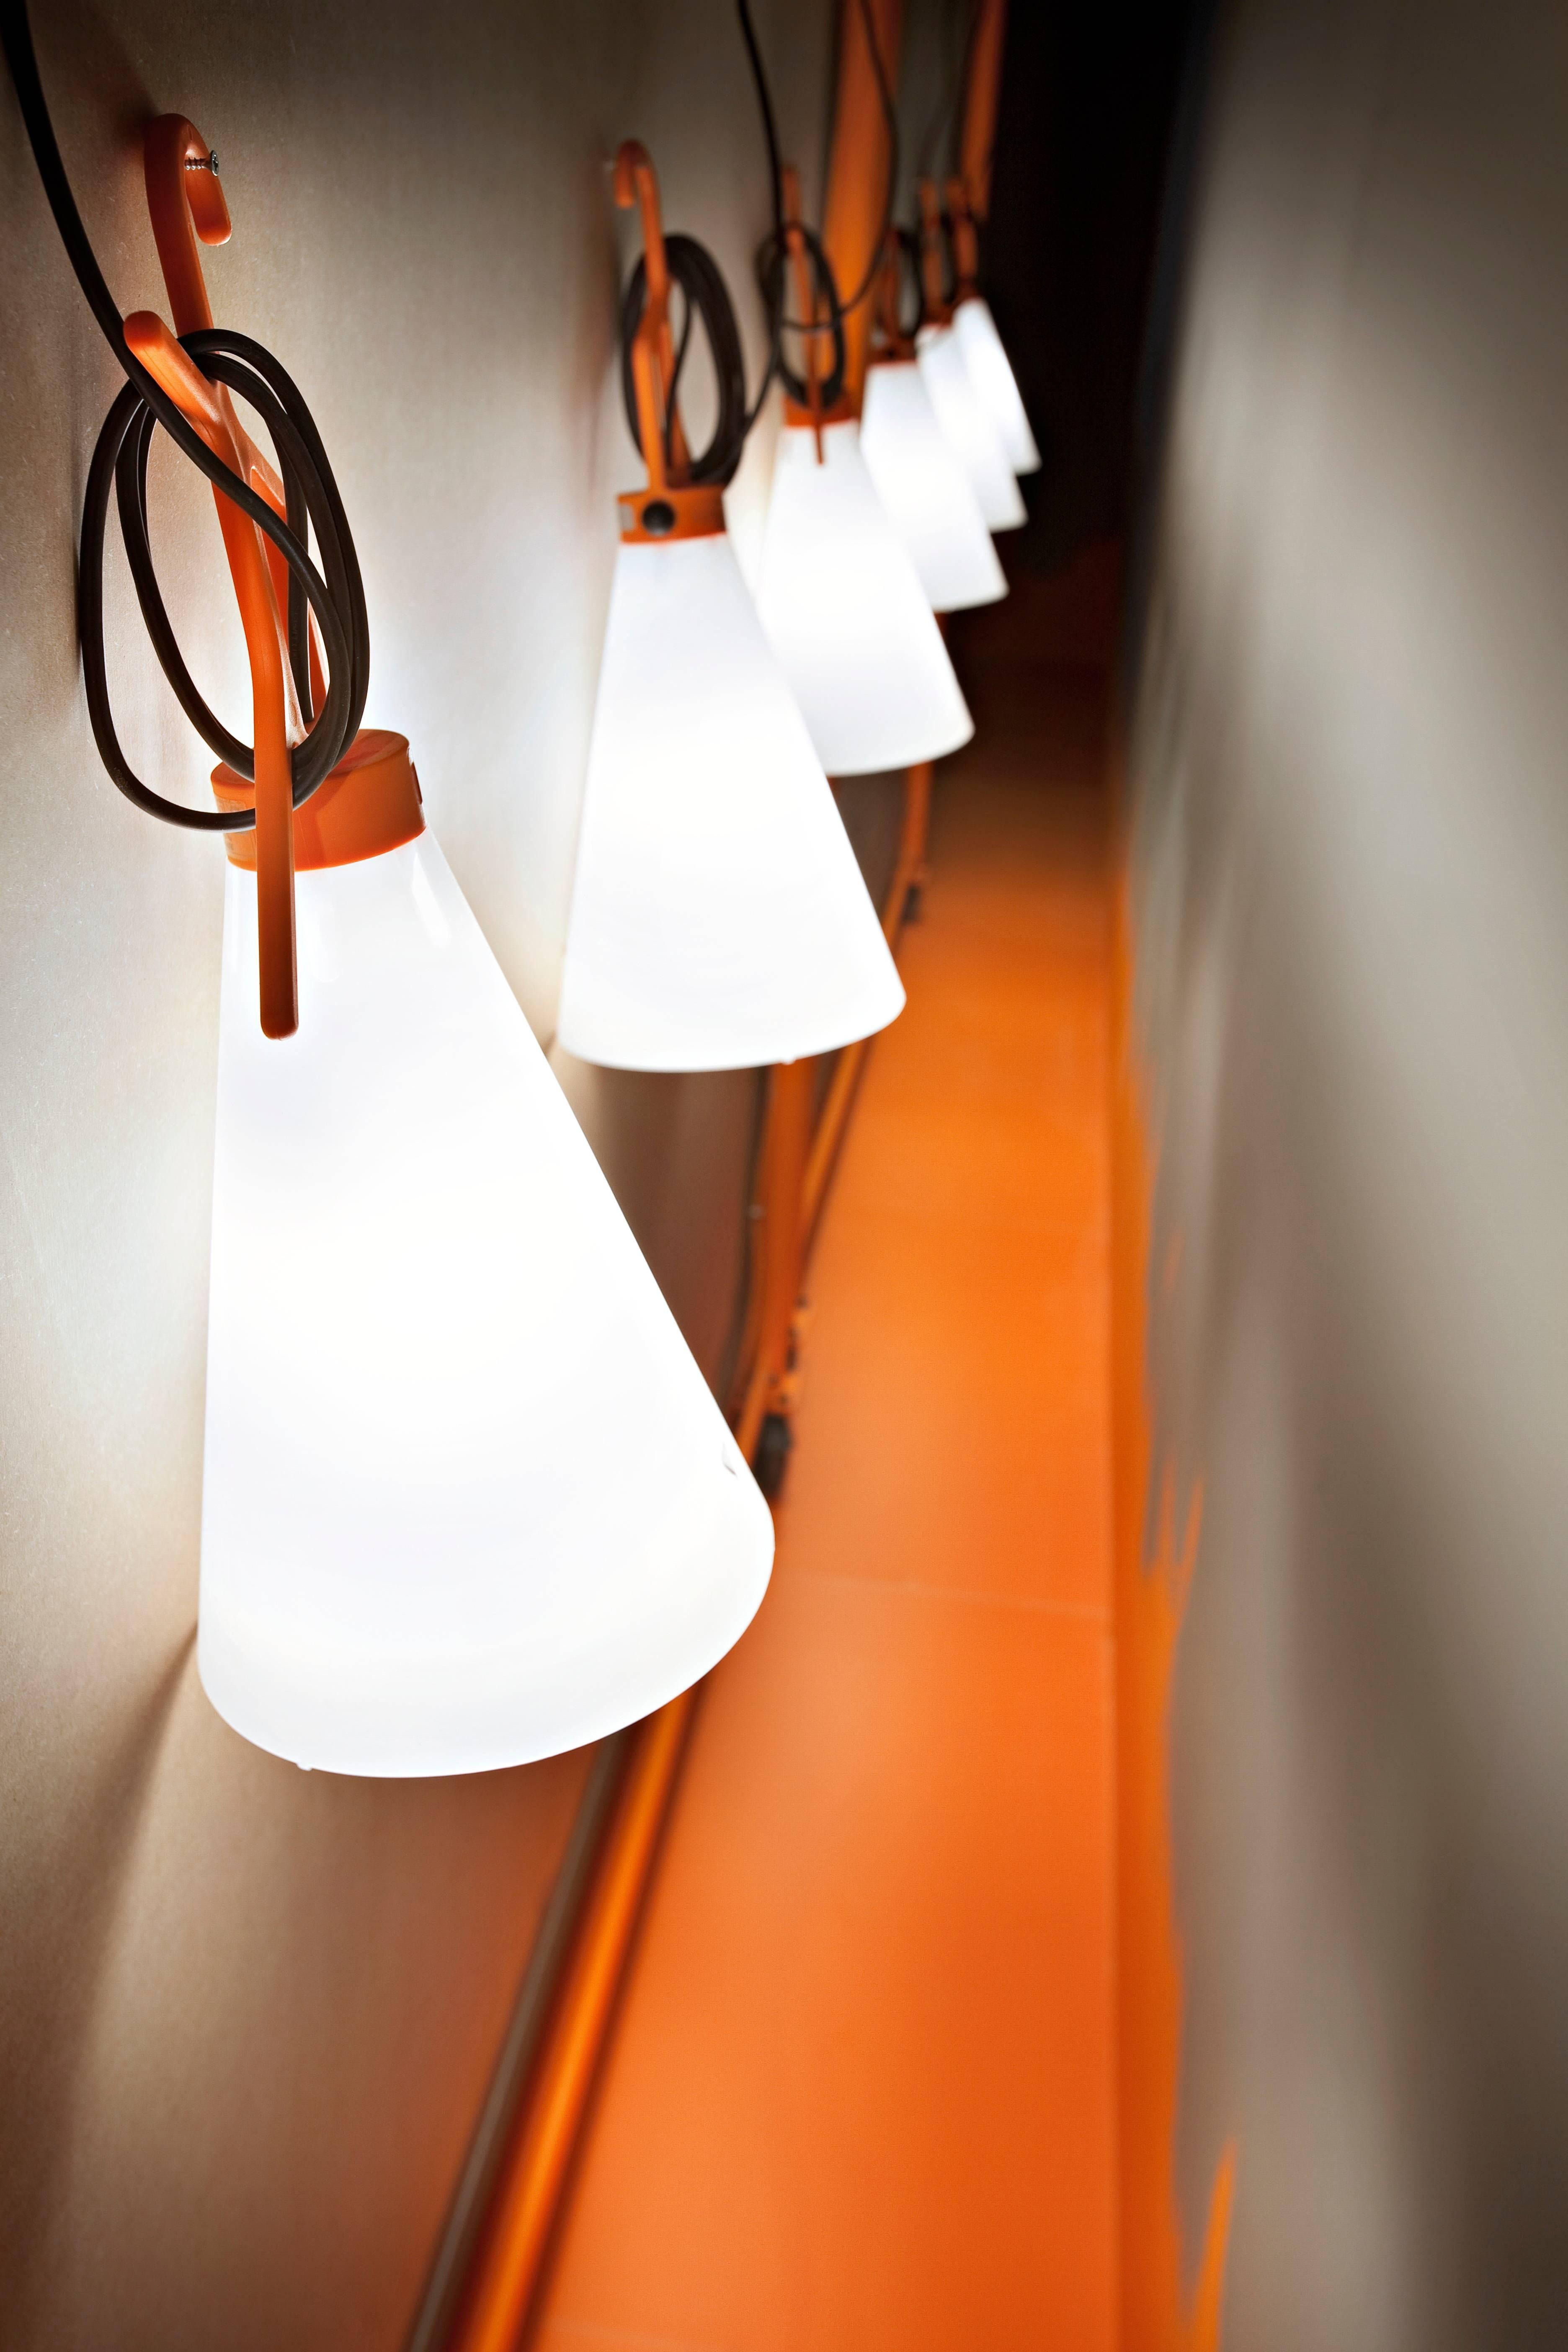 Modern FLOS May Day Table Lamp in Orange by Konstantin Grcic For Sale